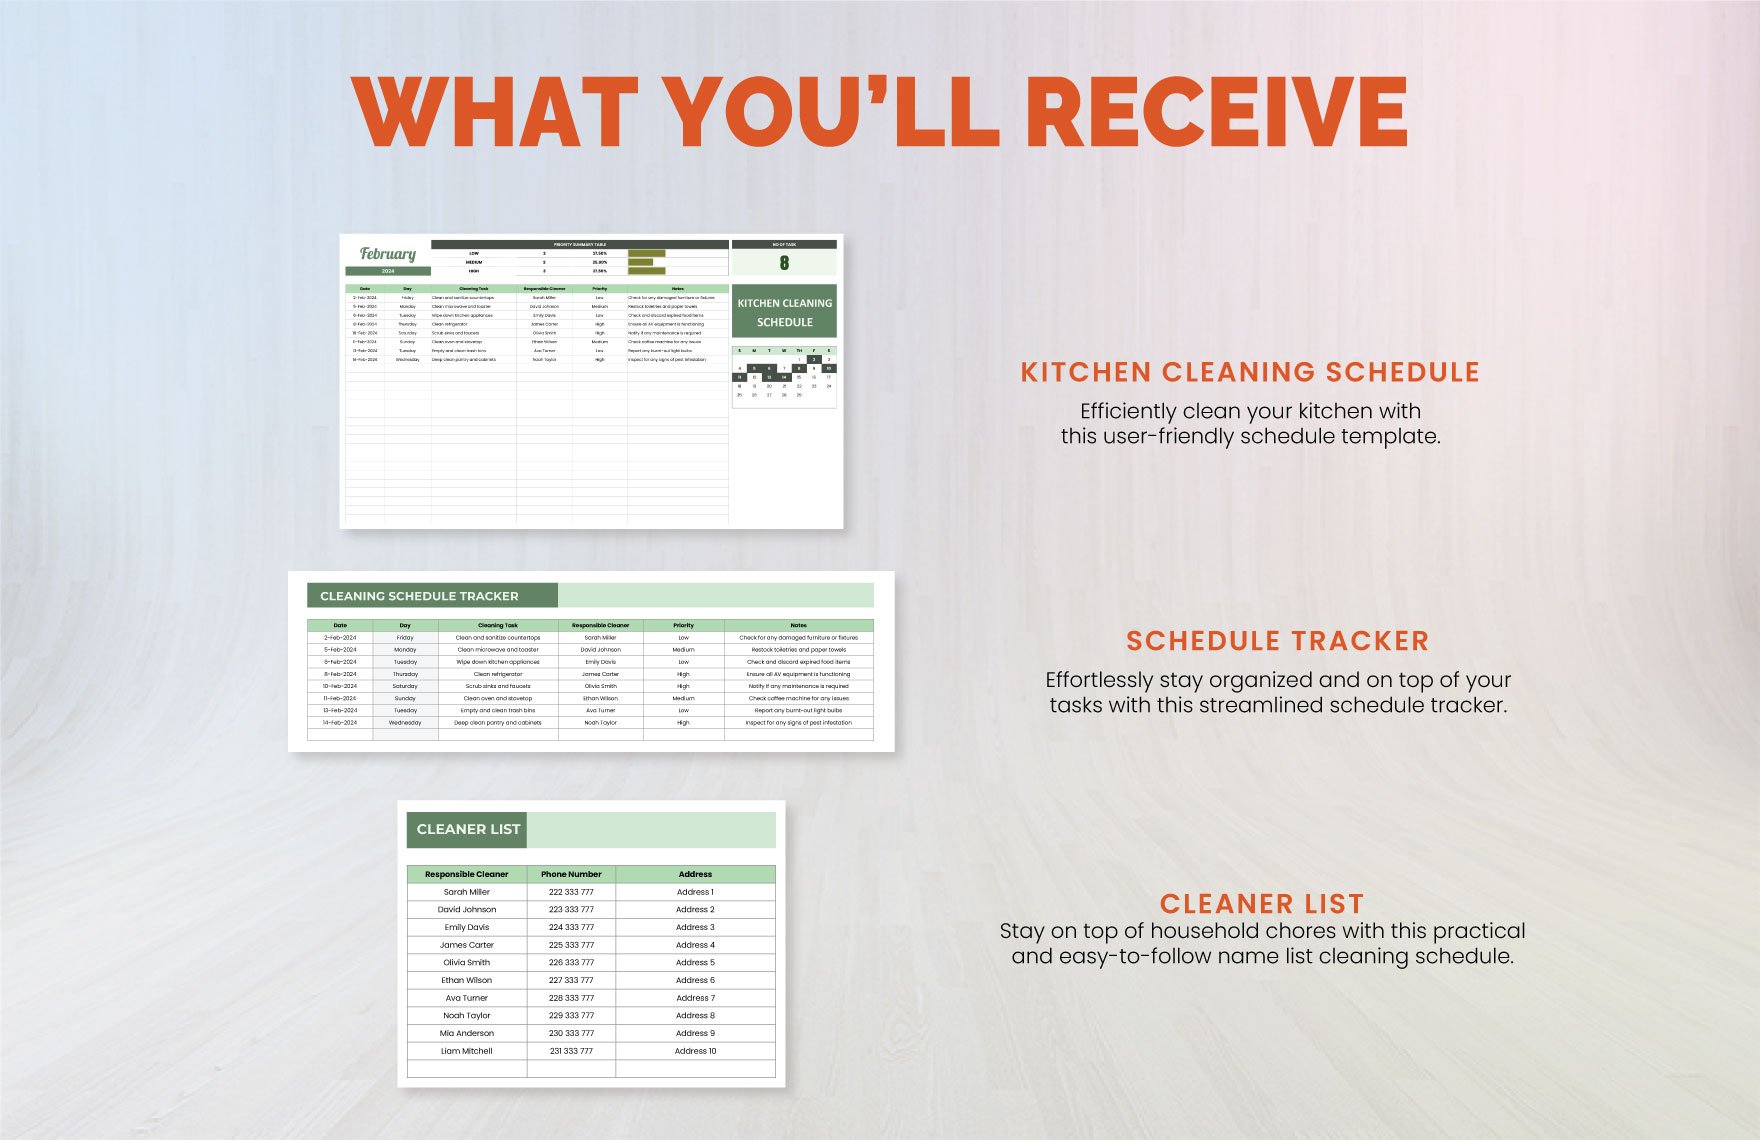 Kitchen Cleaning Schedule Template